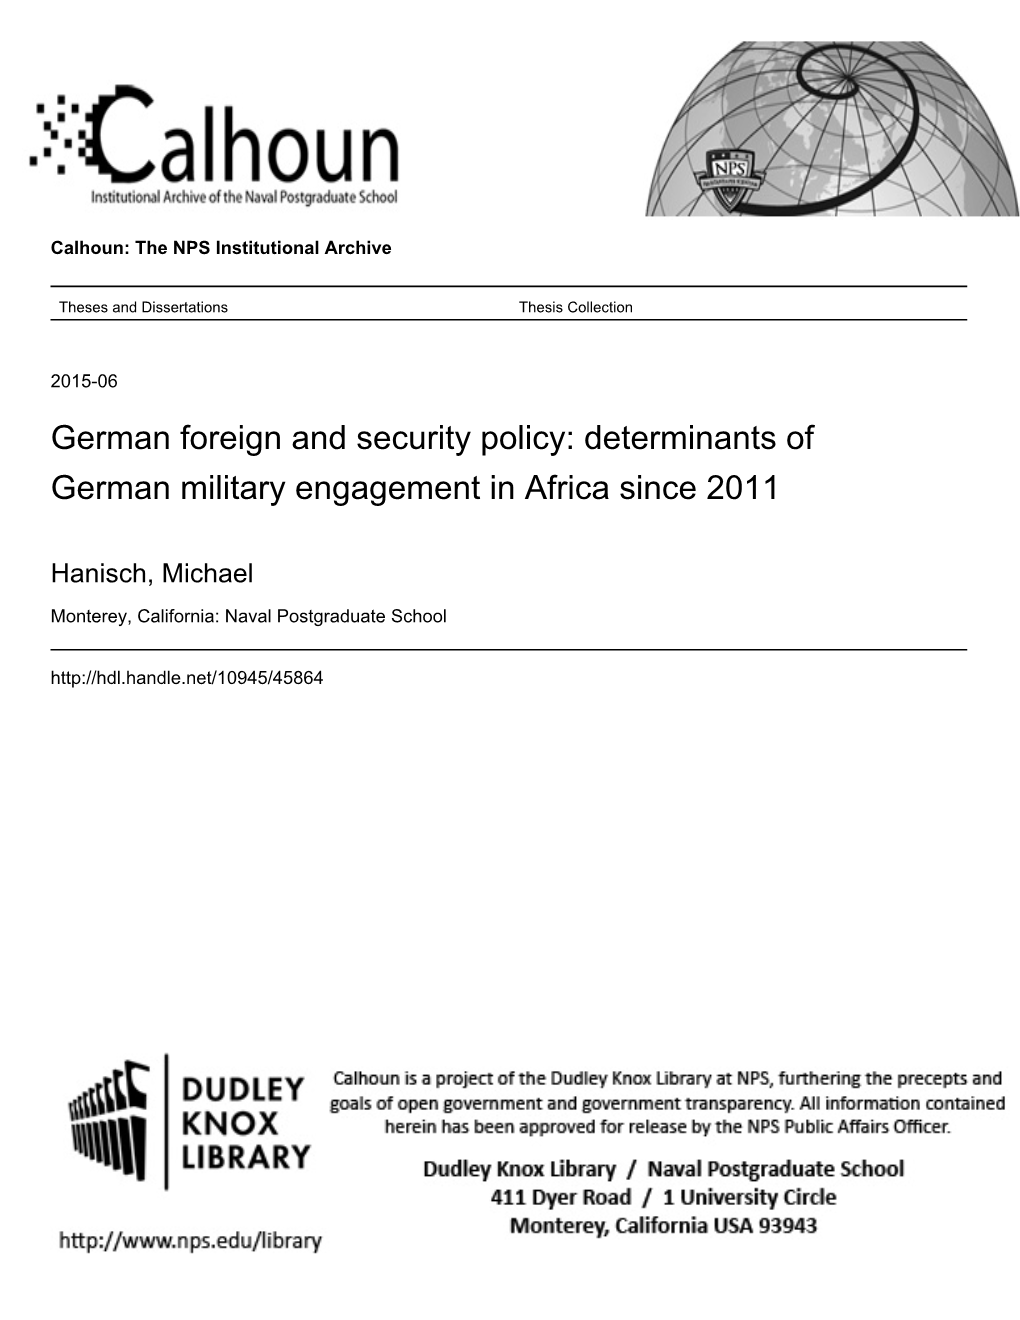 German Foreign and Security Policy: Determinants of German Military Engagement in Africa Since 2011